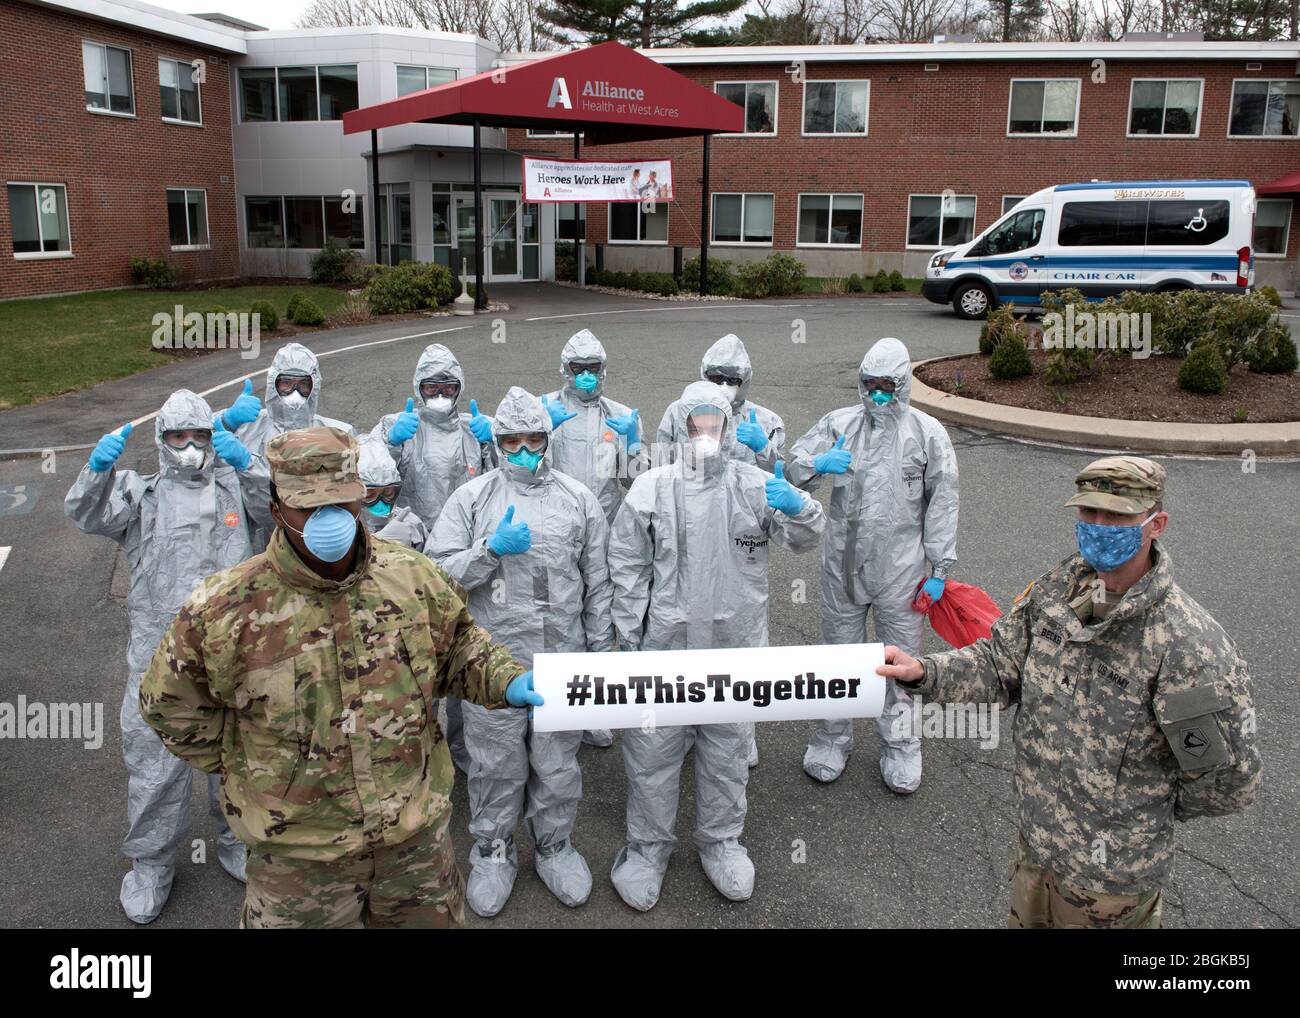 Soldiers and Airmen from the Massachusetts National Guard gather together prior to completing COVID-19 testing on residents at the Alliance at West Acres nursing home, Brockton, Mass., April 10, 2020. Twelve medical teams are activated throughout the state and are conducting COVID-19 testing at medical facilities and nursing homes with high-risk populations. Homes and providers are identified by the Department of Public Health and Human Services for testing. This mission is one of several operations across the commonwealth in support of coronavirus response efforts. (U.S. Air National Guard ph Stock Photo